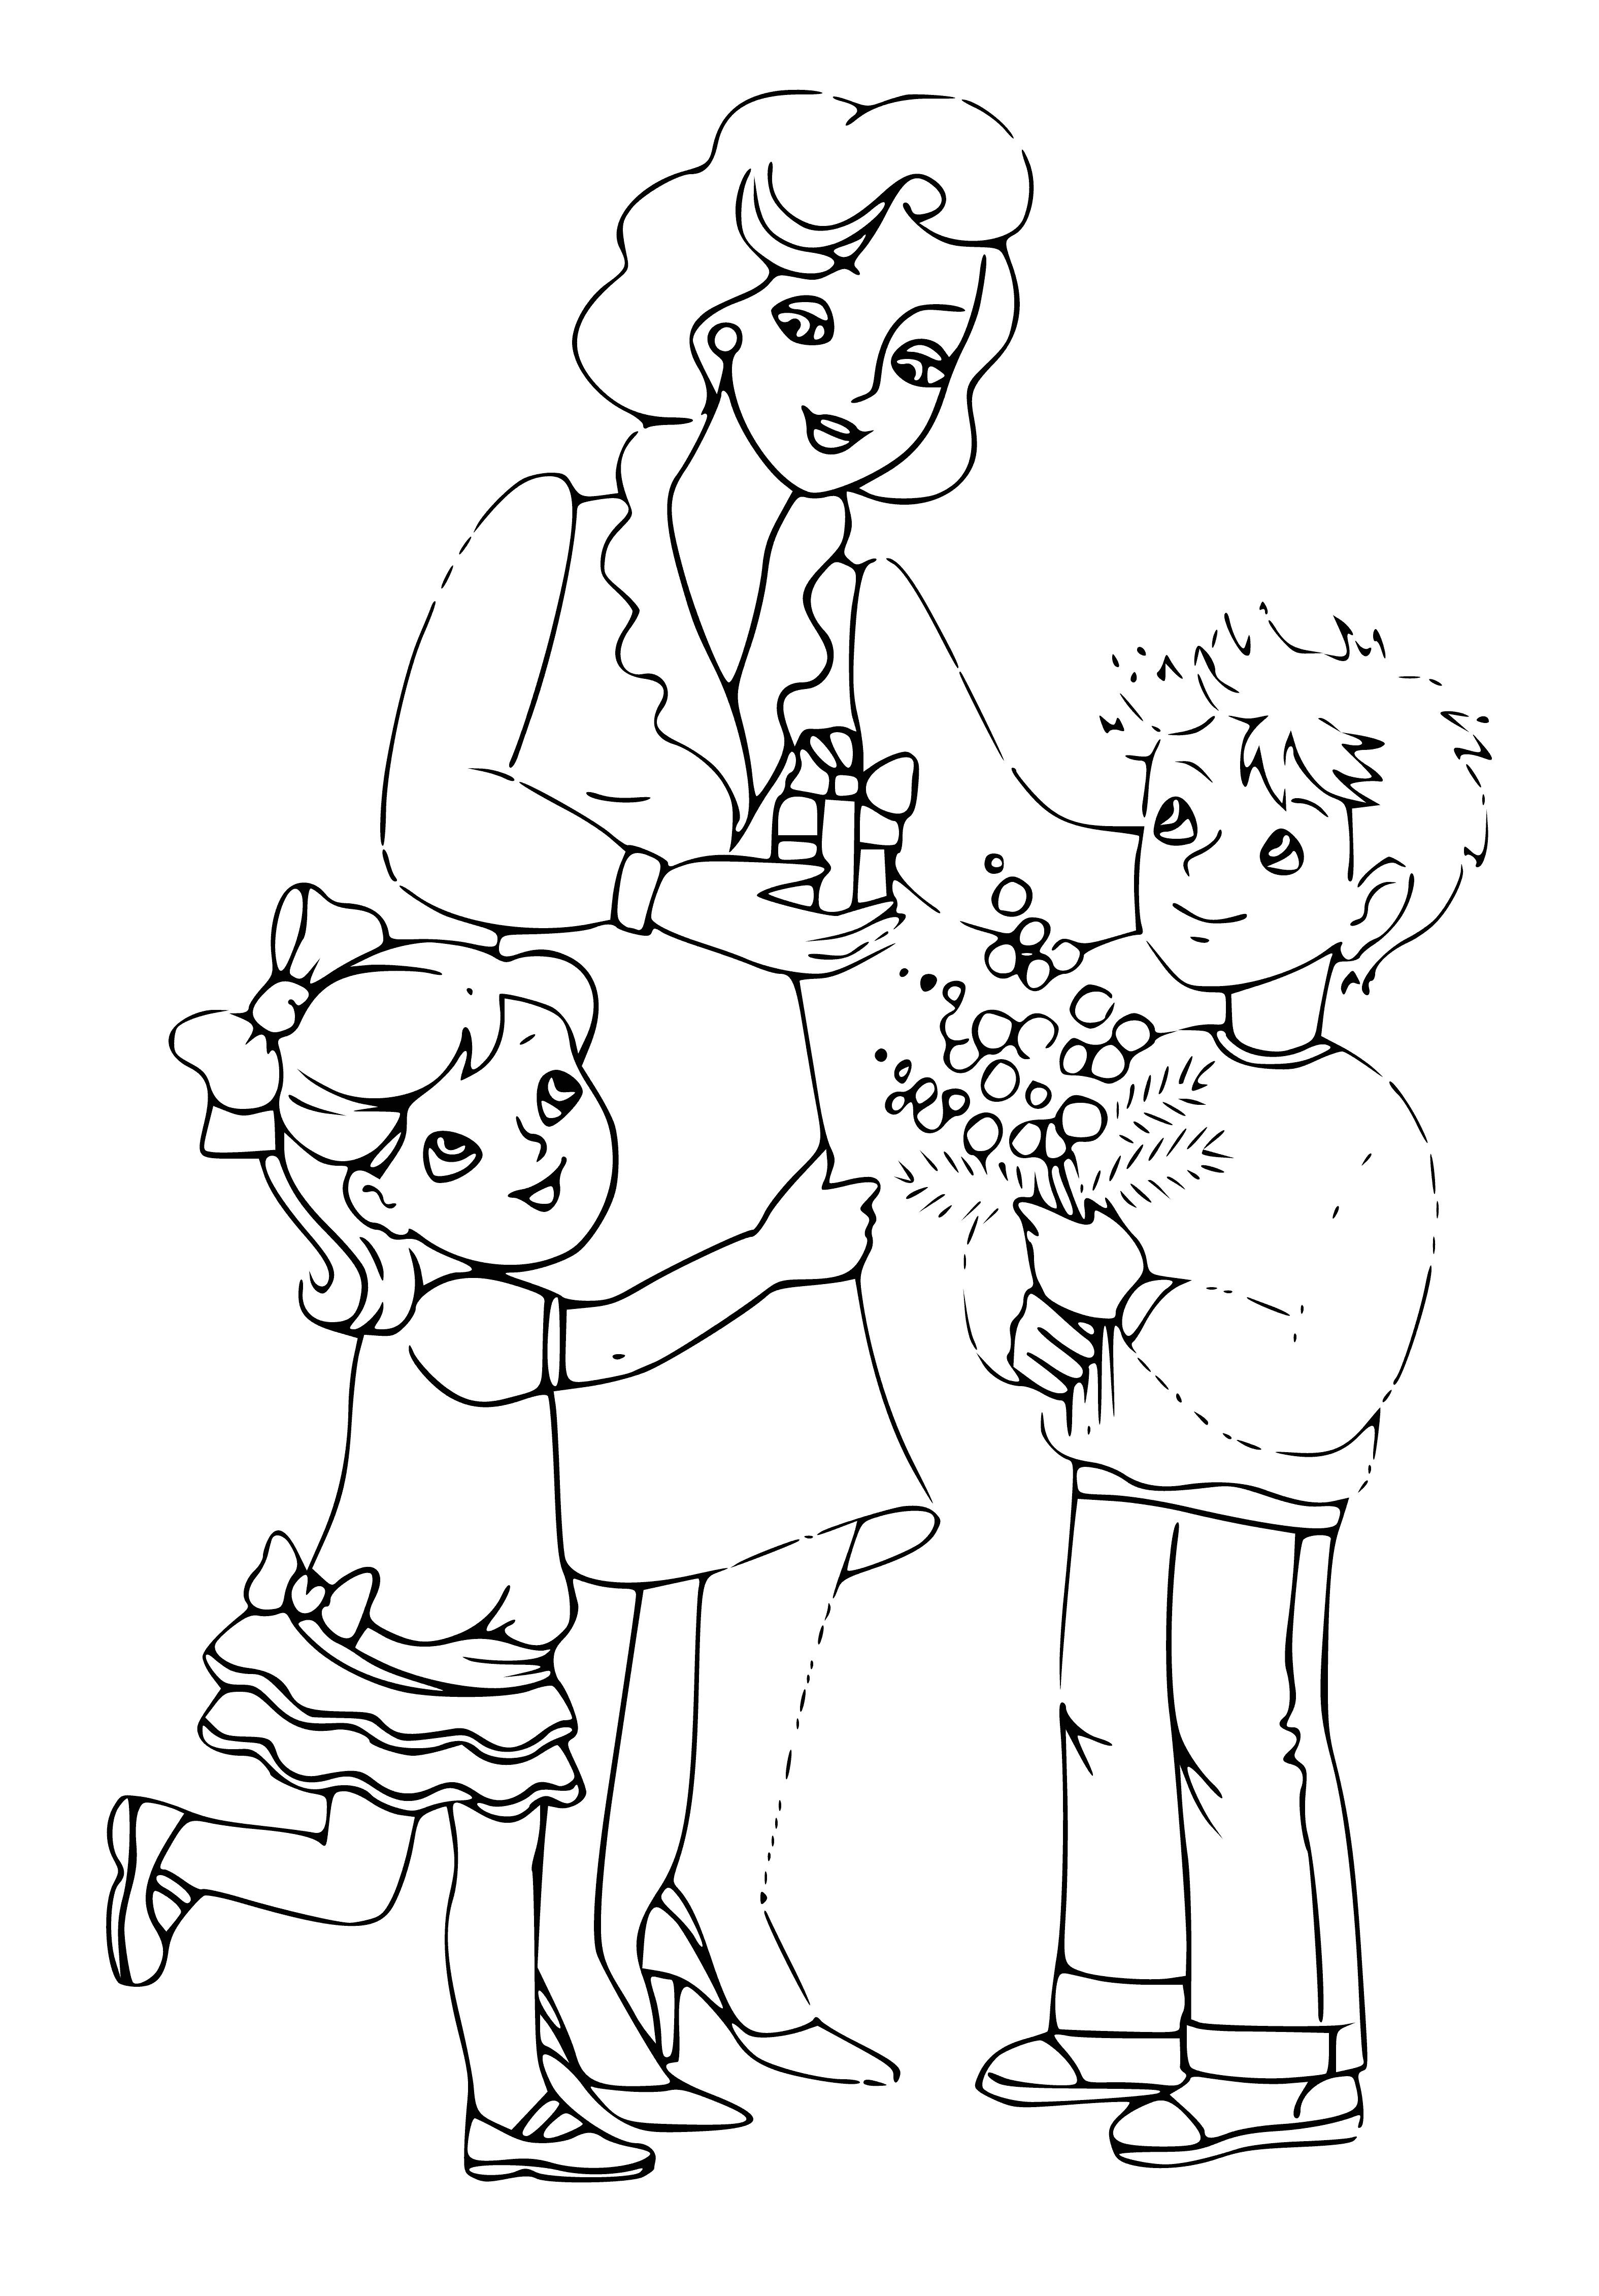 March 8 coloring page